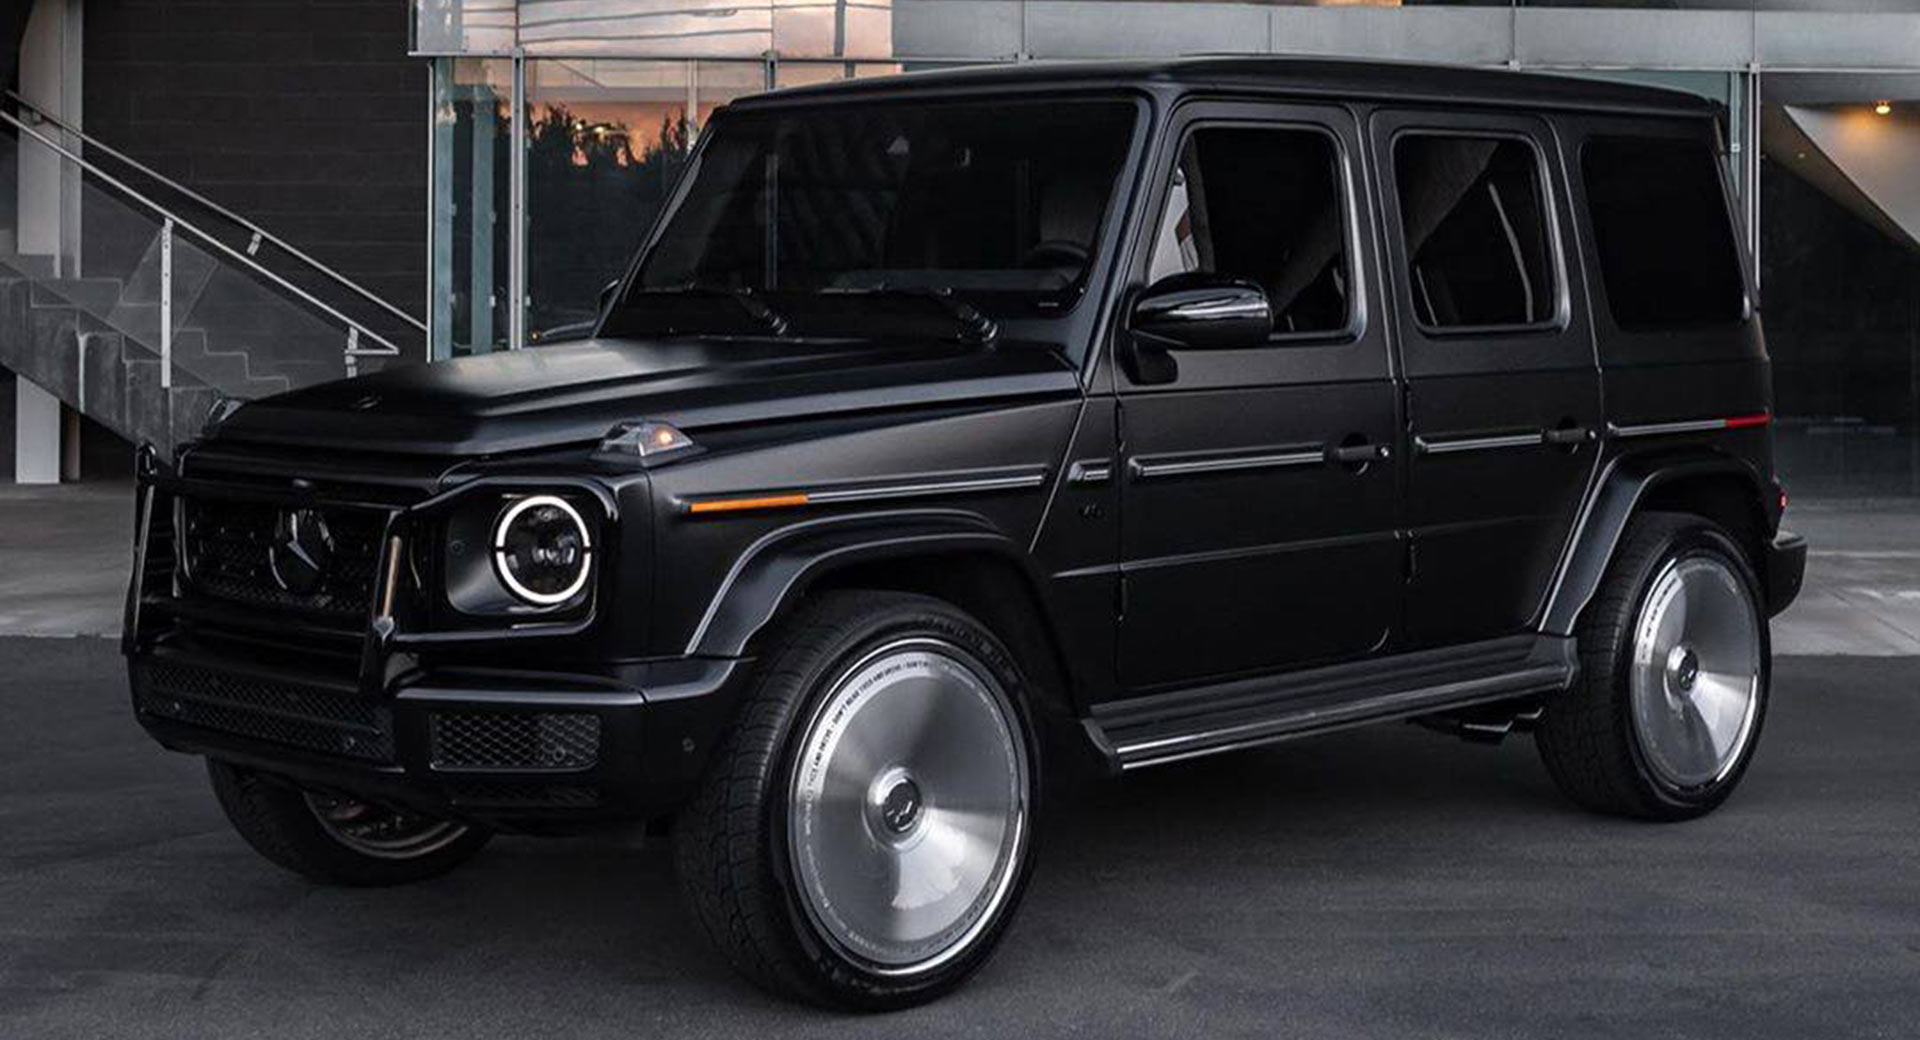 Mercedes Benz G Wagon Tries On Dish Wheels What Do You Think Carscoops